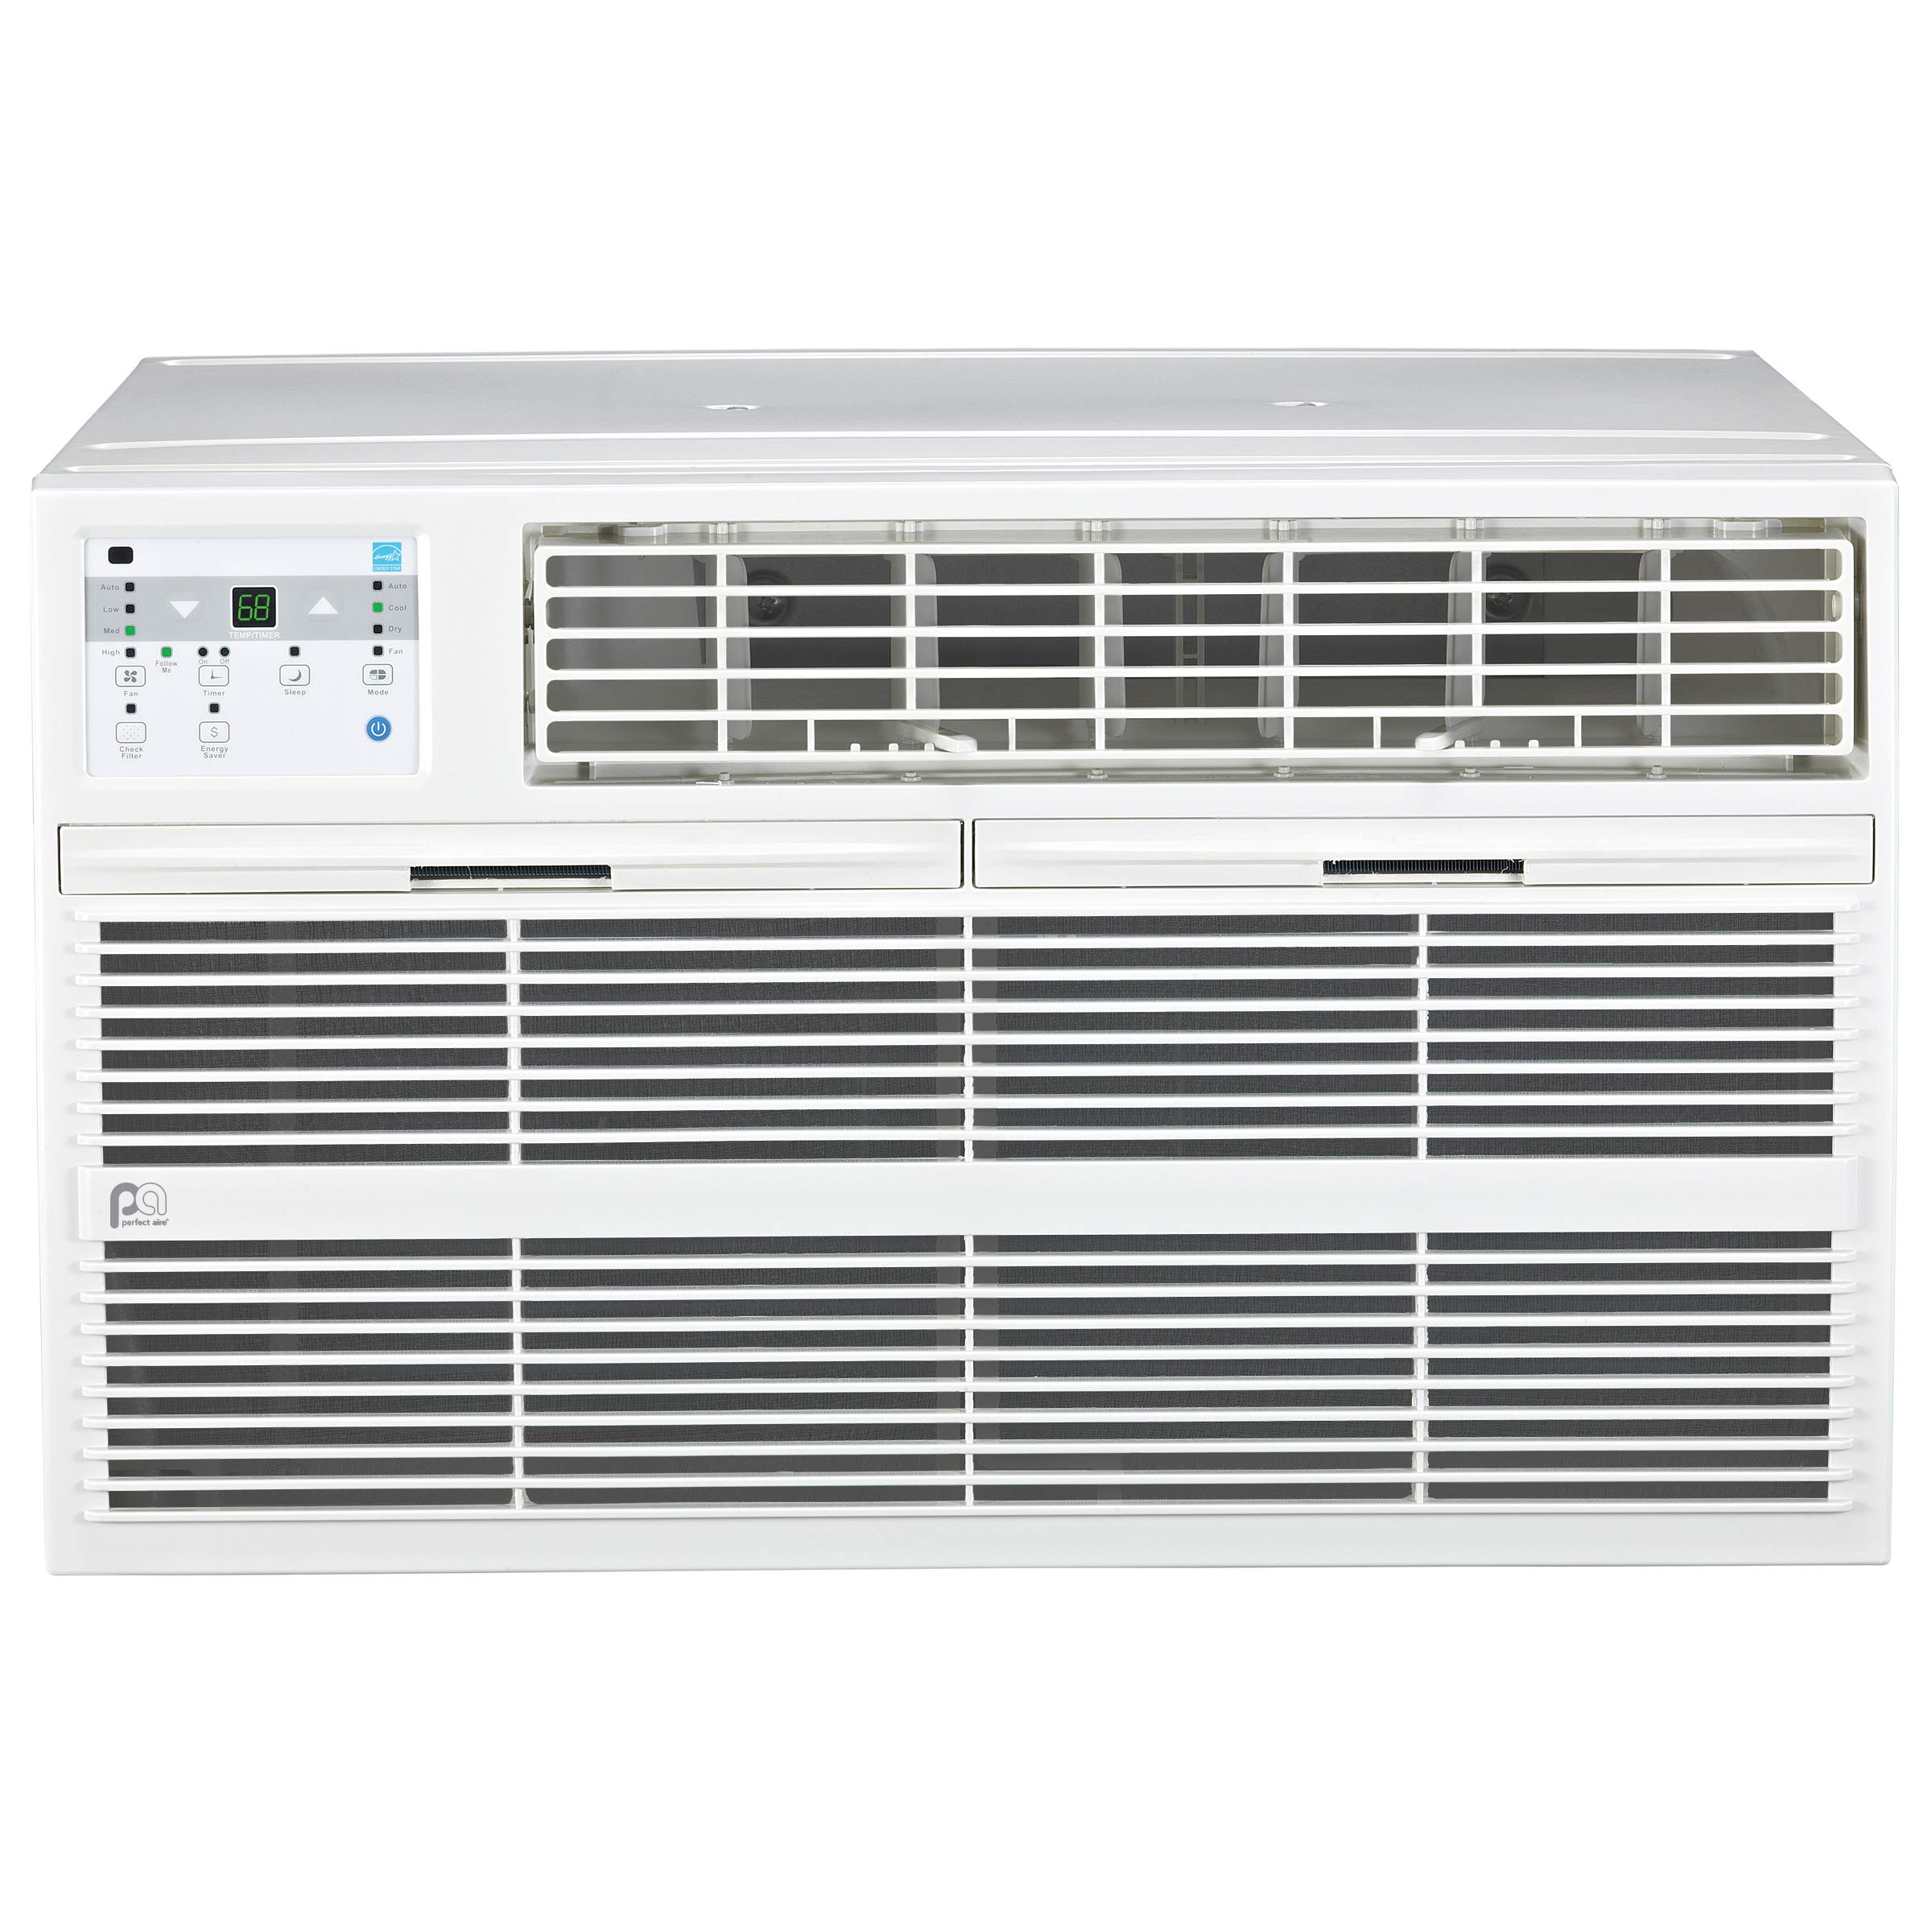 PerfectAire 4PATW10002 10,000/9,800 BTU Thru-the-Wall Air Conditioner with Remote Control, EER 10.6, 400-450 Sq. Ft. Coverage, White, 10,000 BTU 230V